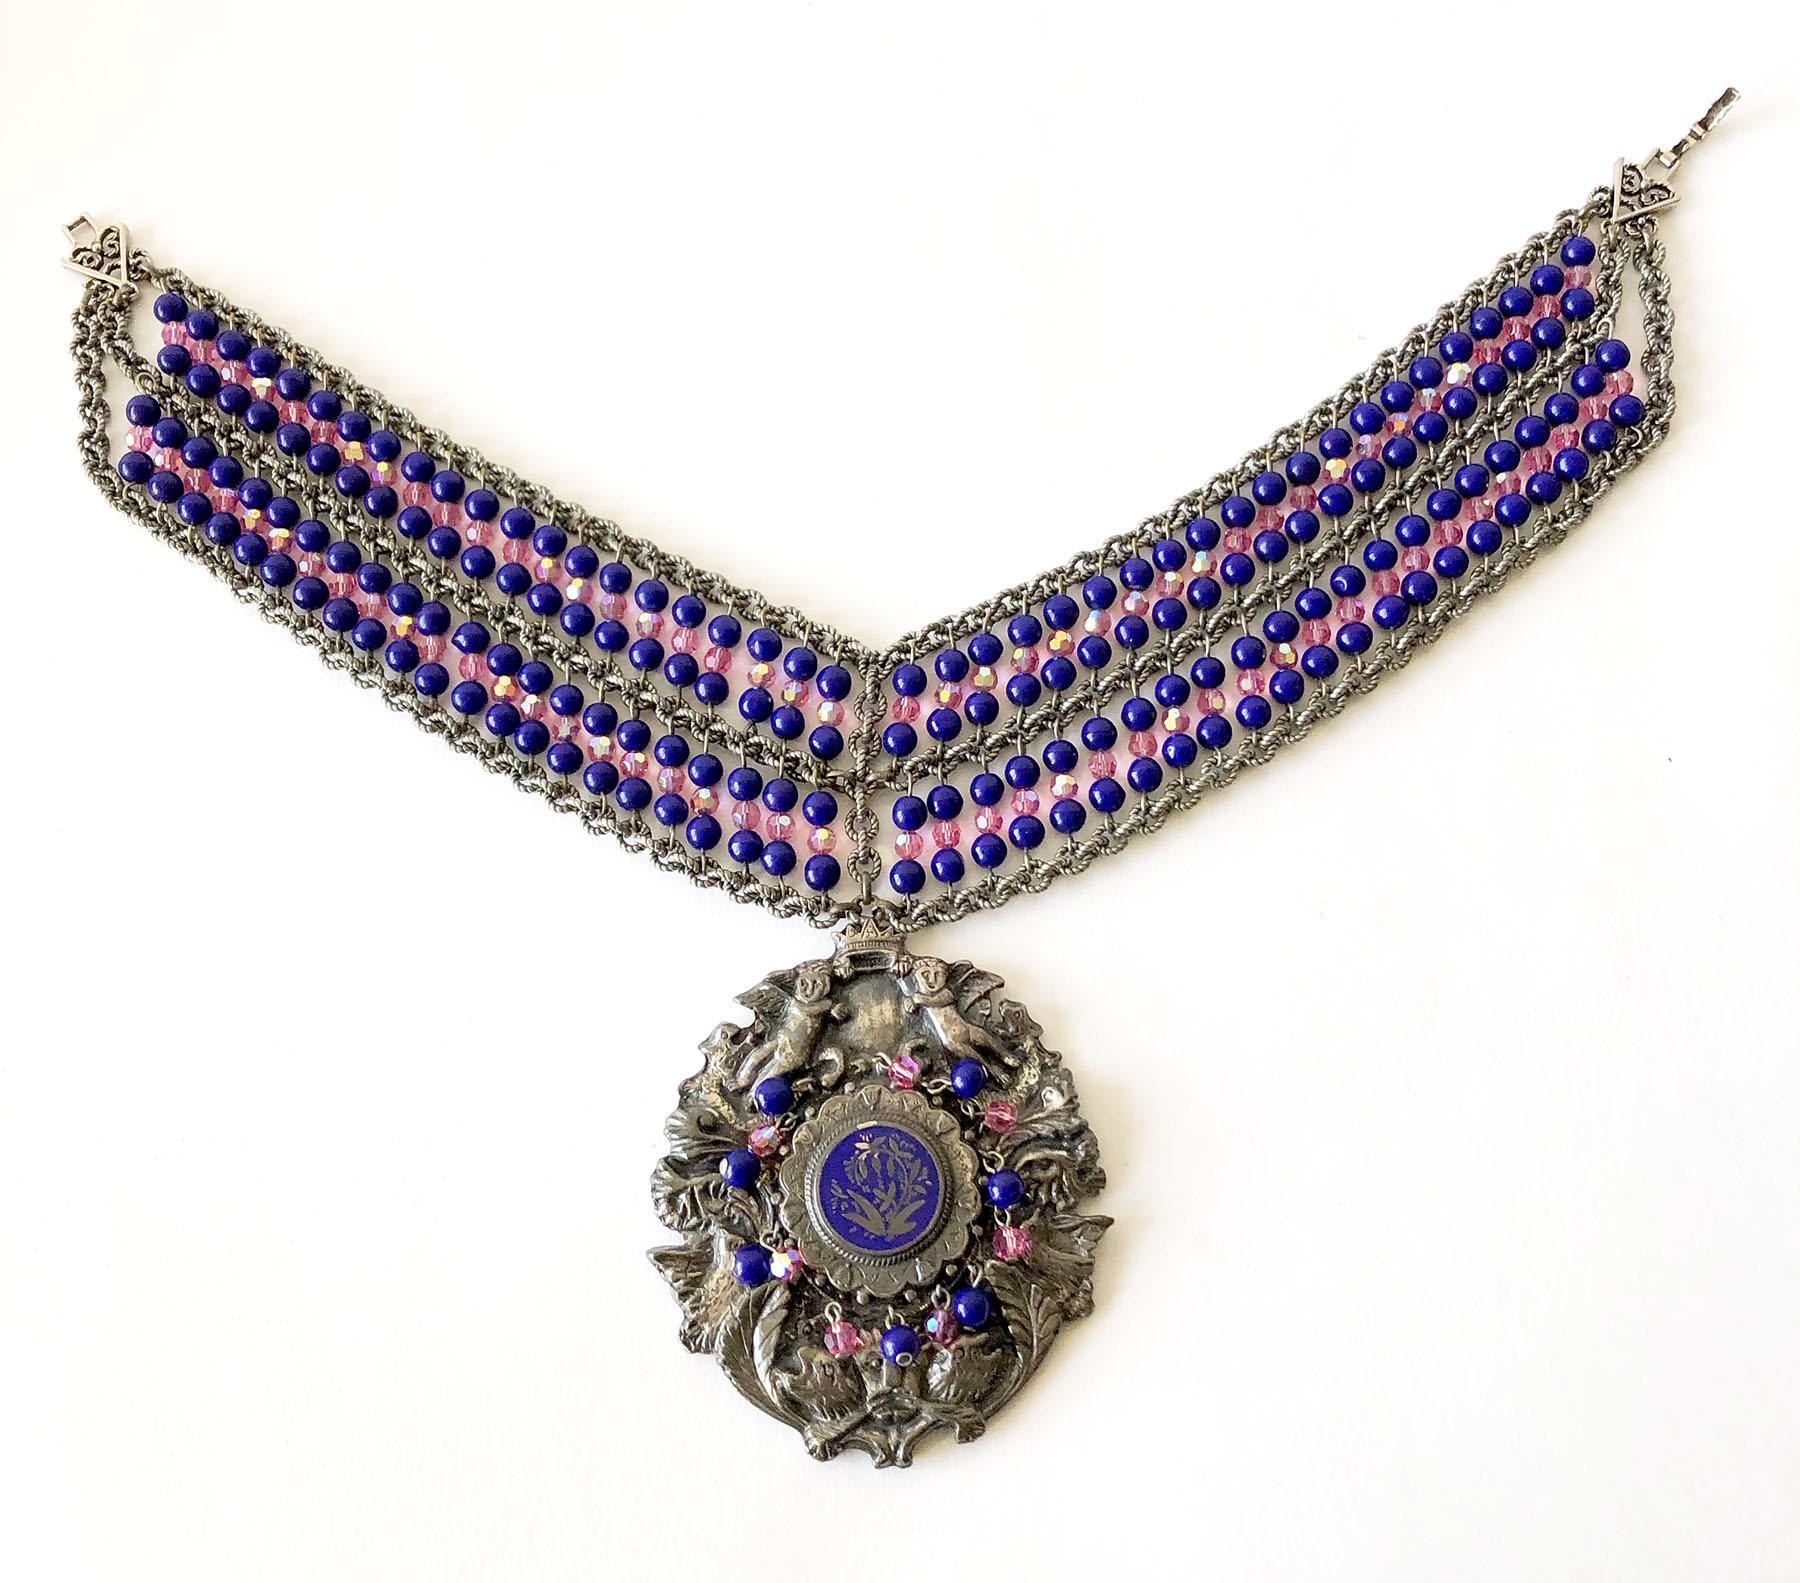 Handmade, one of a kind vintage 1980's banner style necklace with a large embellished glass beaded medallion designed and created by Mark Merrill of Detroit, Michigan.  Necklace portion measures 14